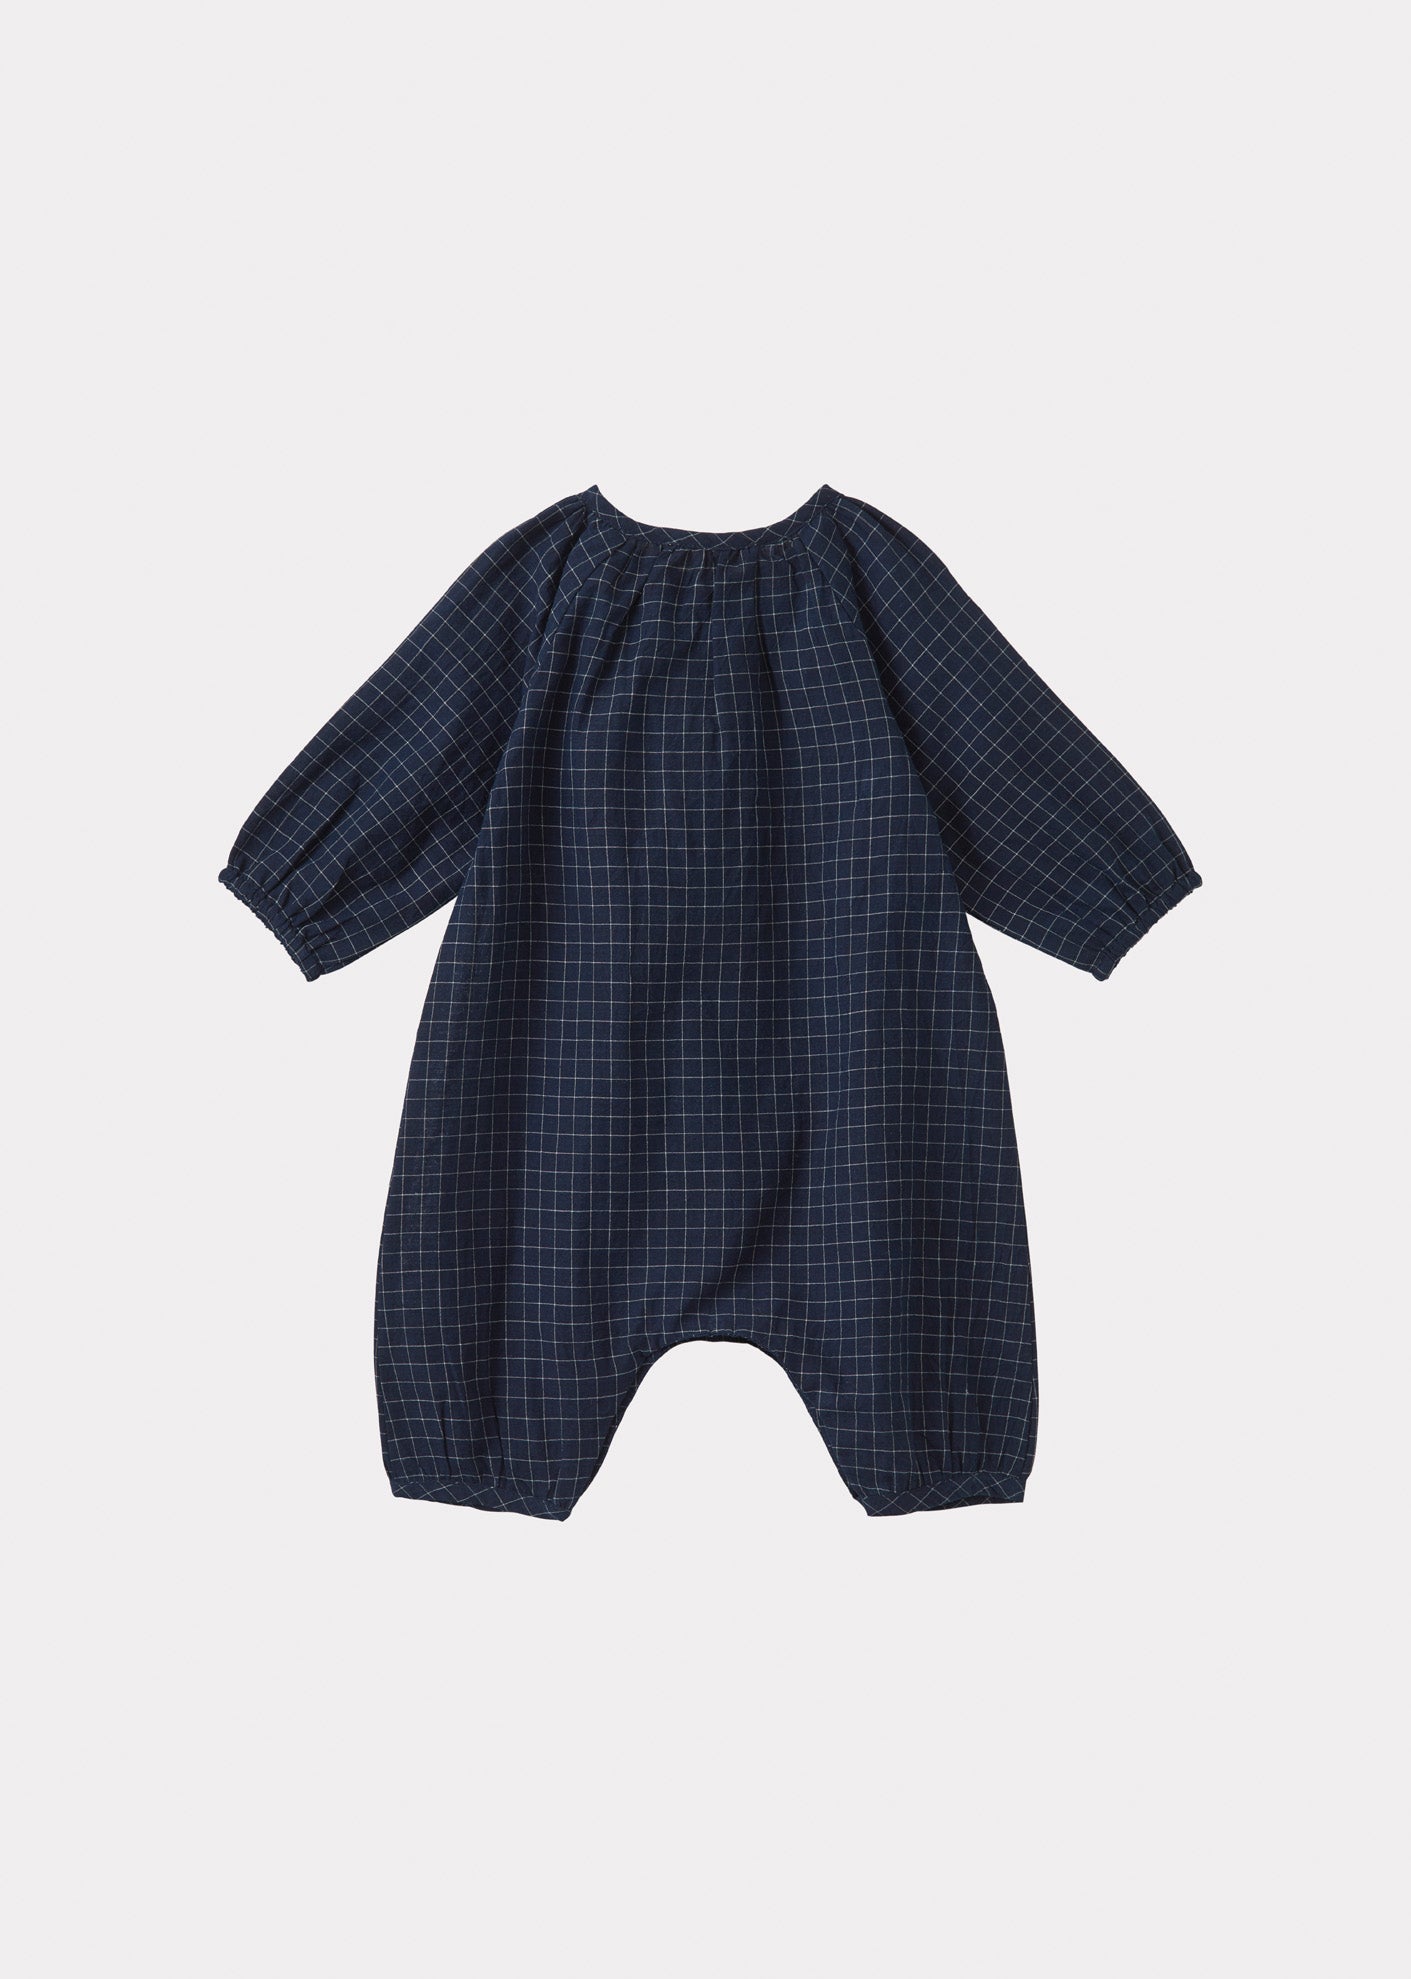 POPULUS BABY ROMPER - NAVY YARN DYED CHECK